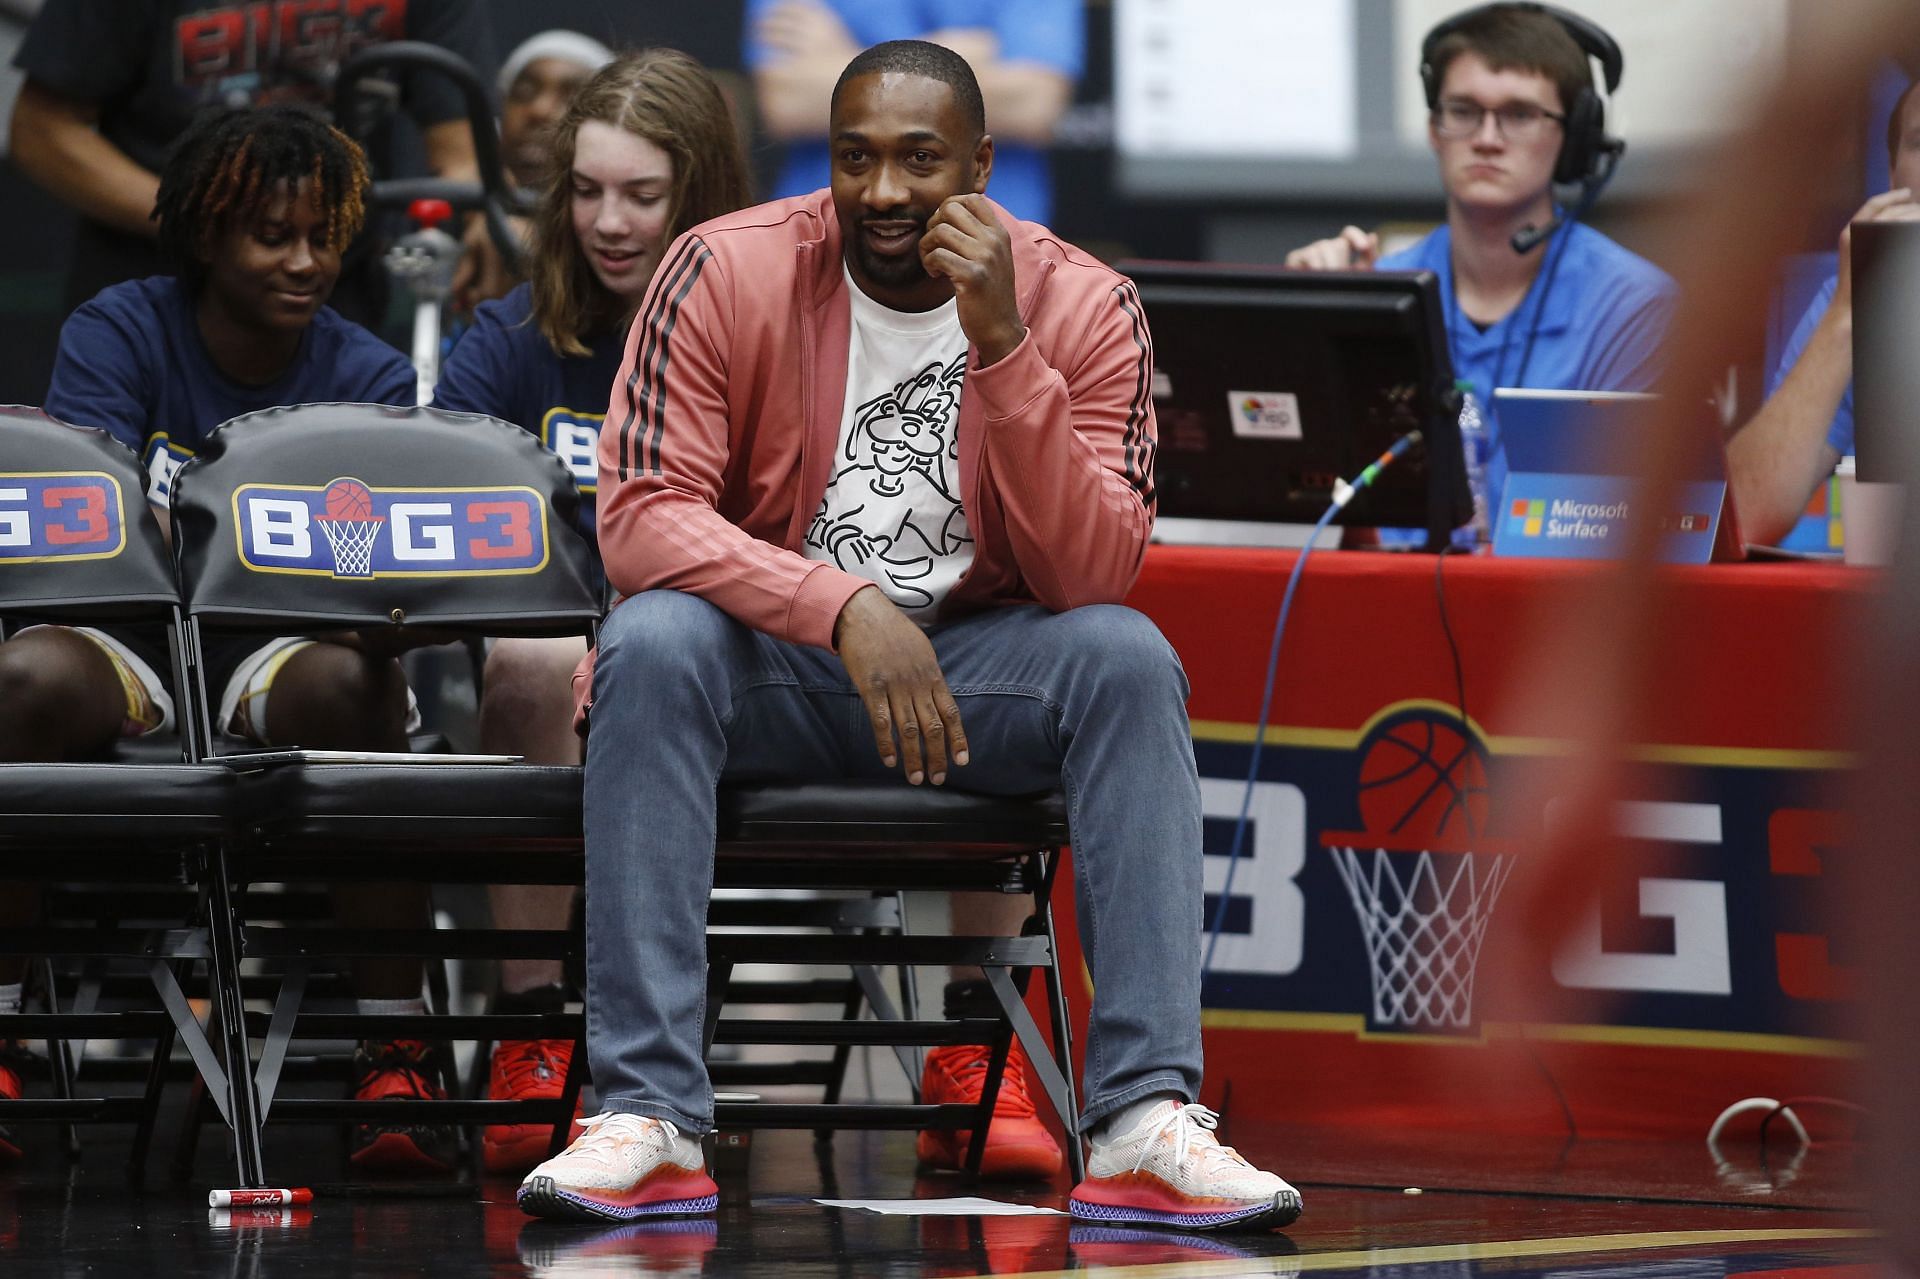 Gilbert Arenas claims Michael Jordan was ‘erased’ from Wizards